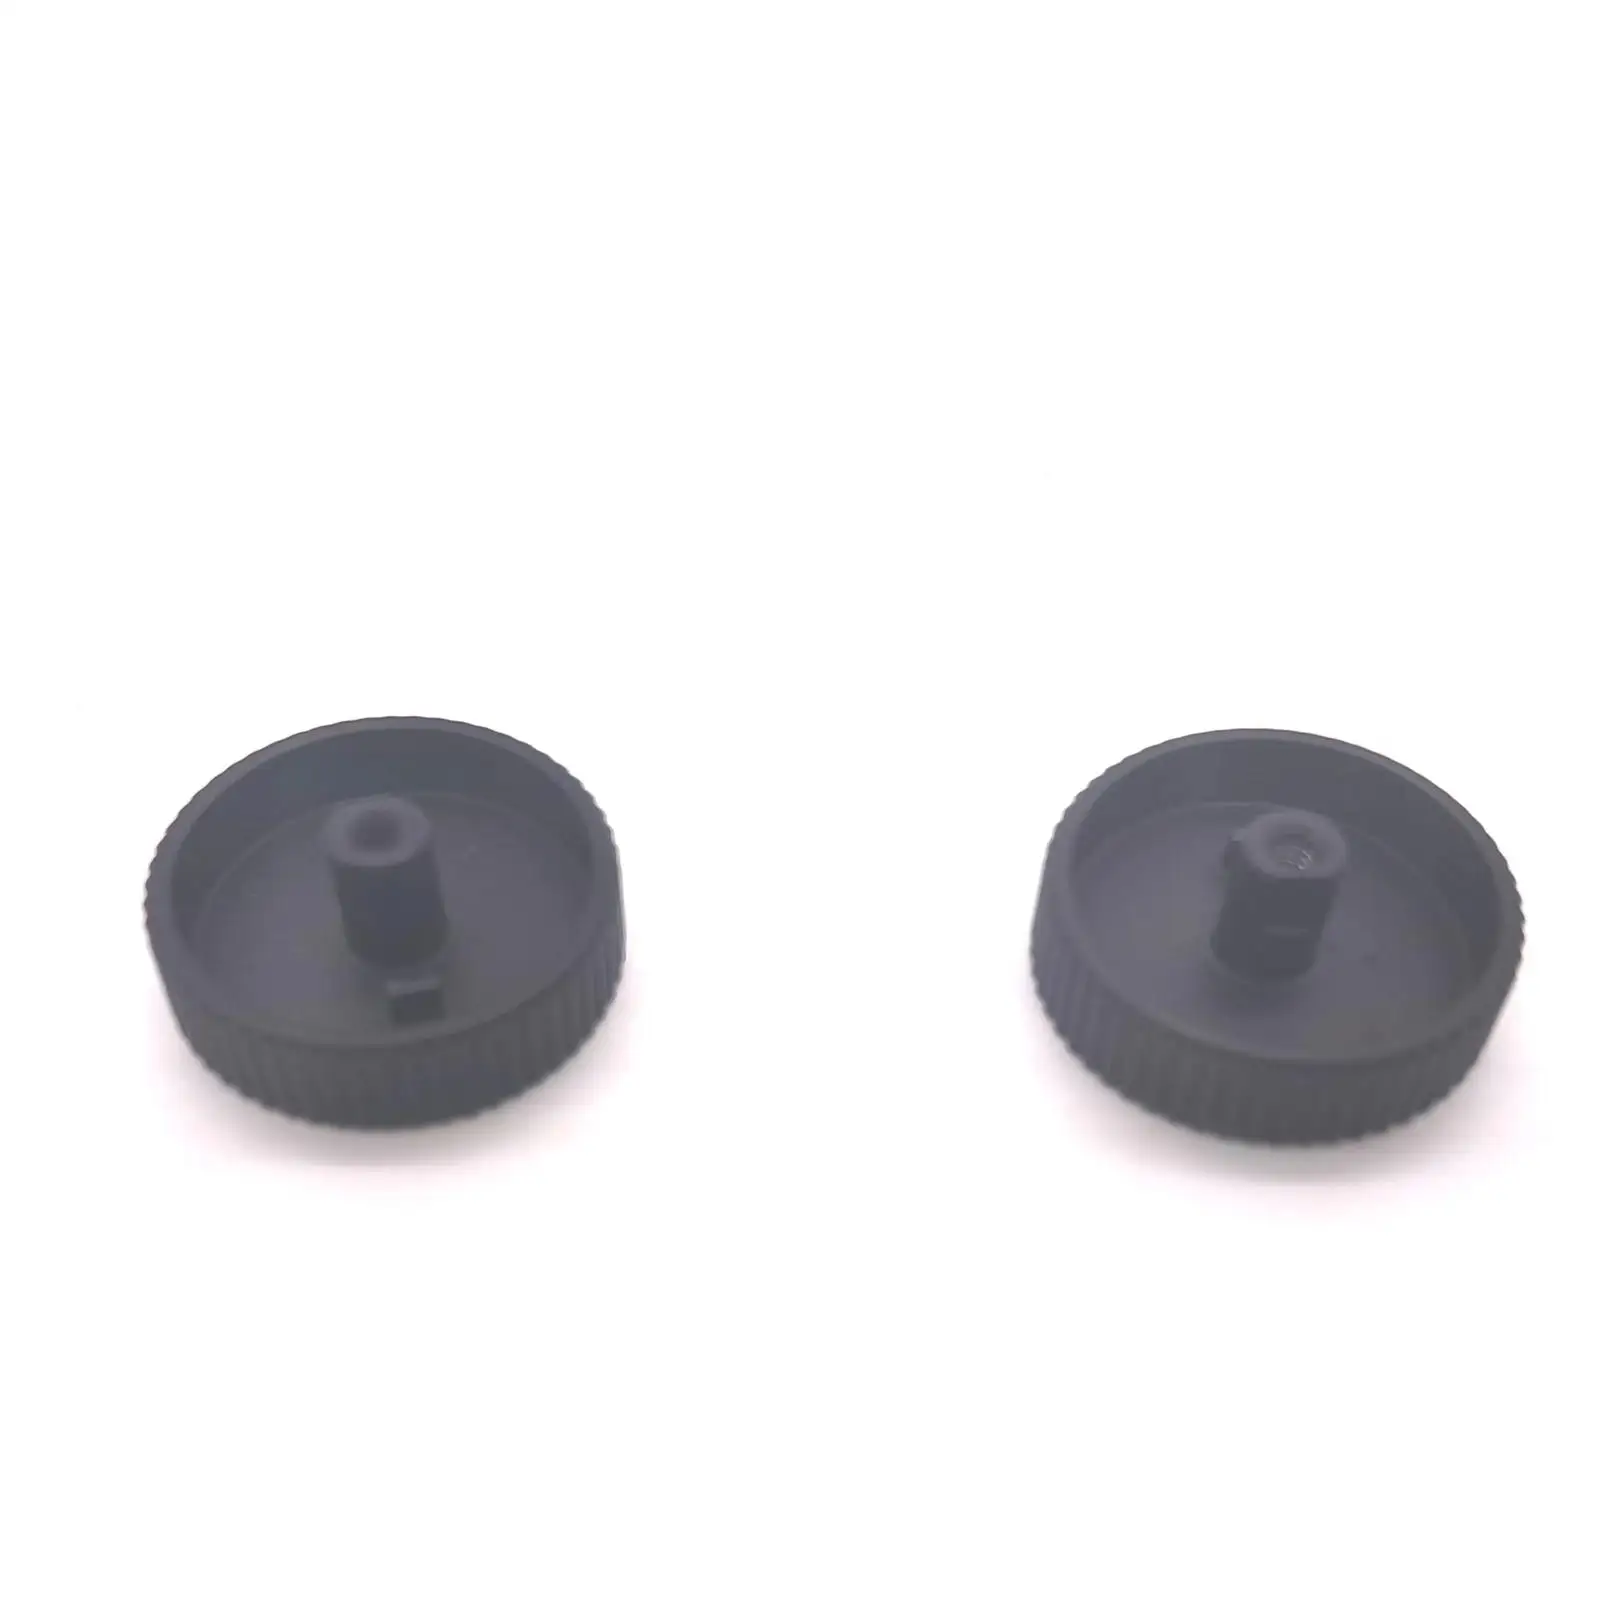 Durable Mode Dial Top Cover Black Nameplate Button Lid for A72 A7RM2 A7R2 Replaces